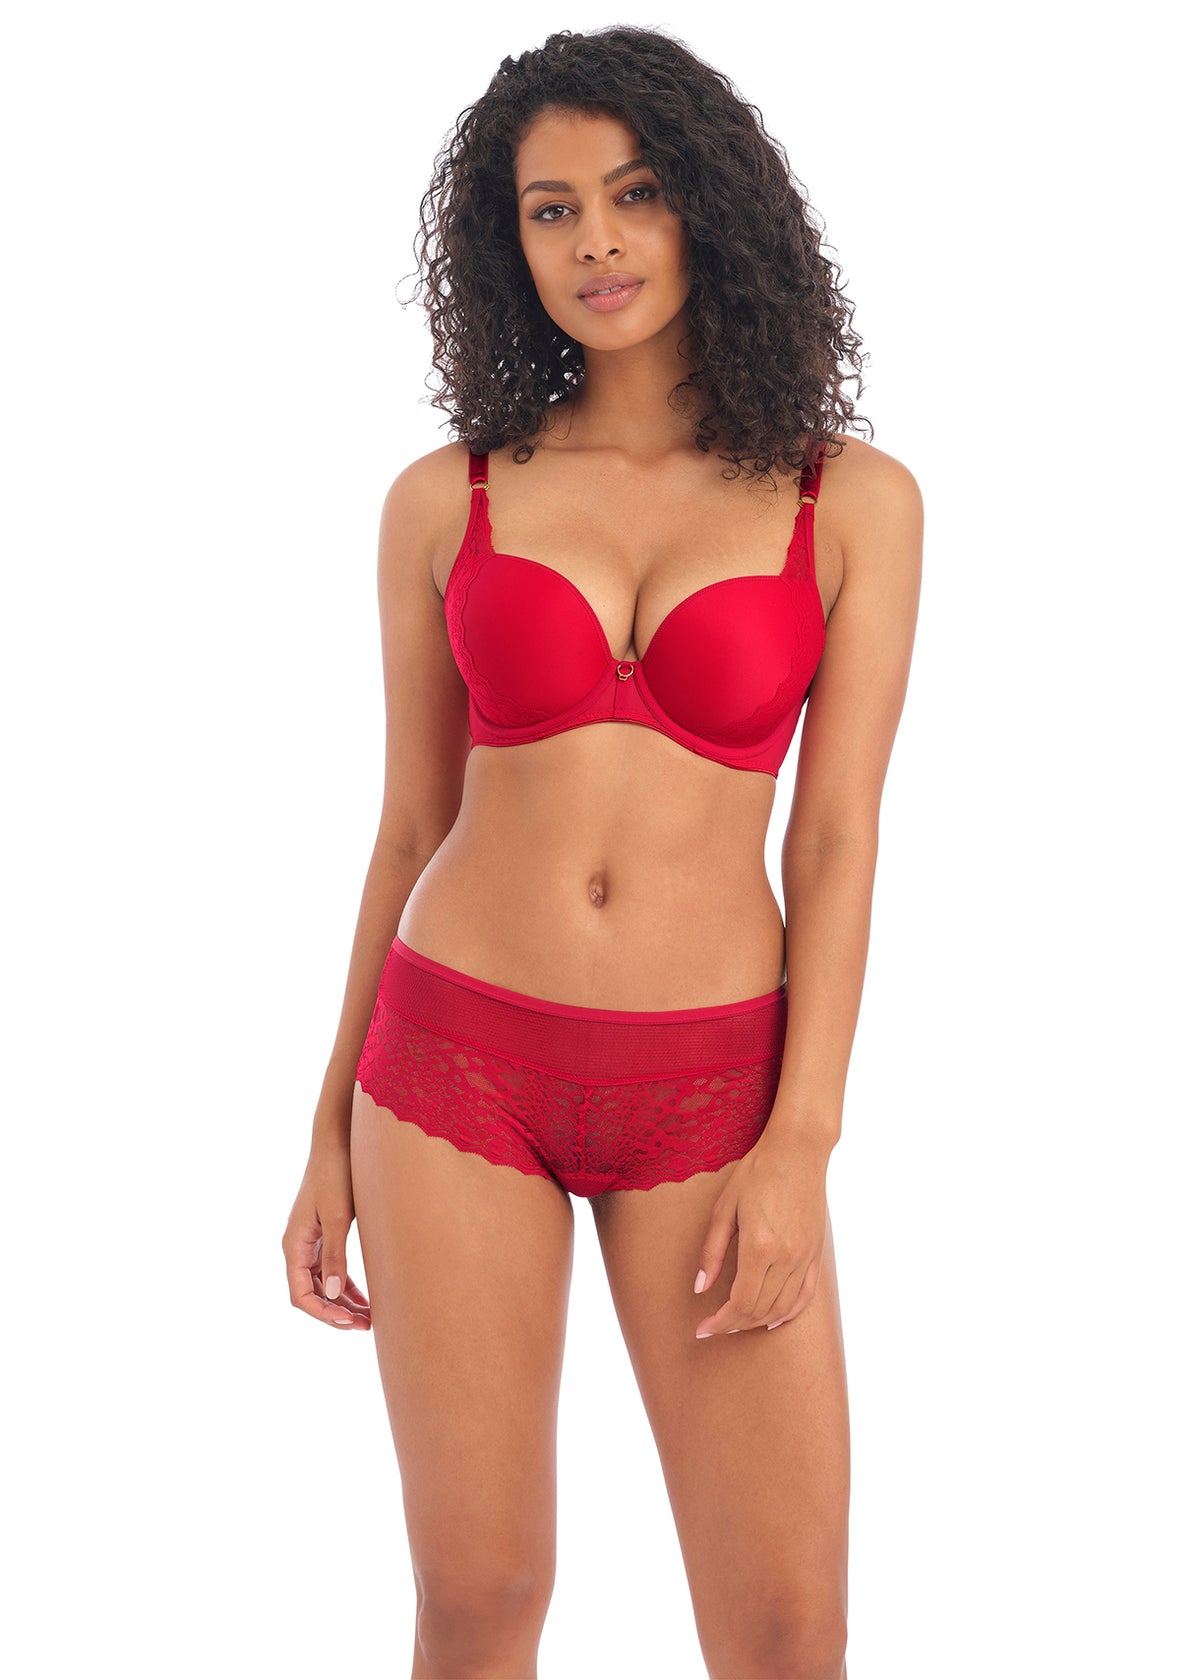 Temptress Underwired Moulded Plunge T-Shirt Bra - Cherry – Leia